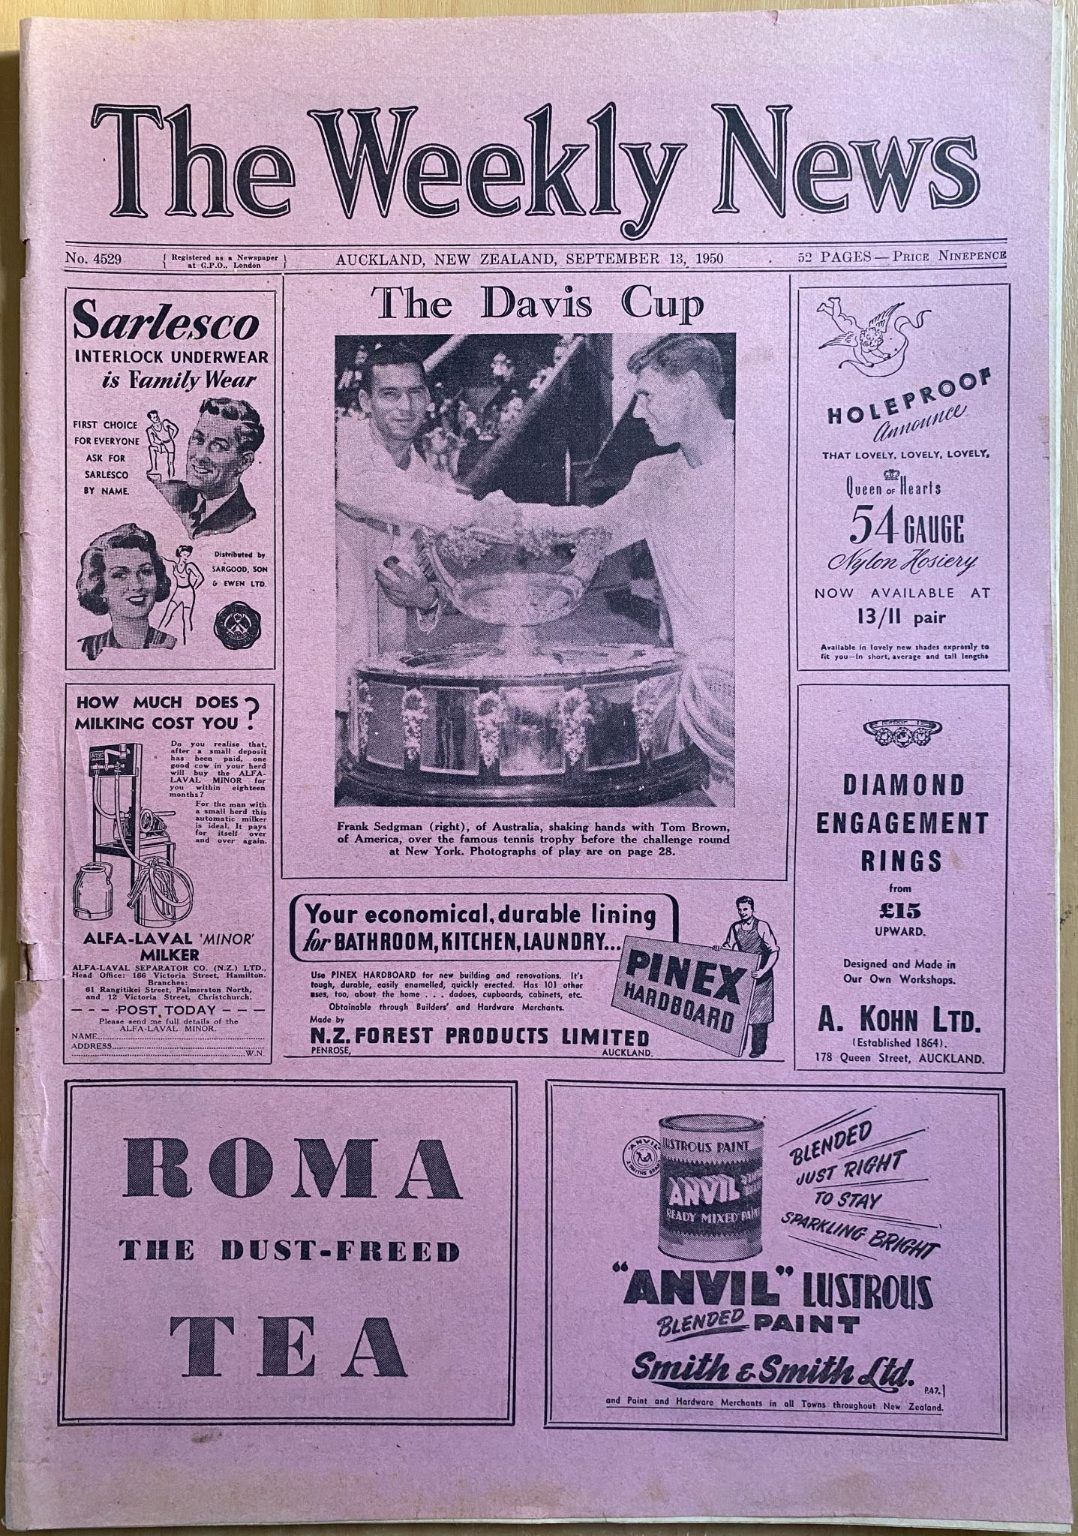 OLD NEWSPAPER: The Weekly News, No. 4529, 13 September 1950